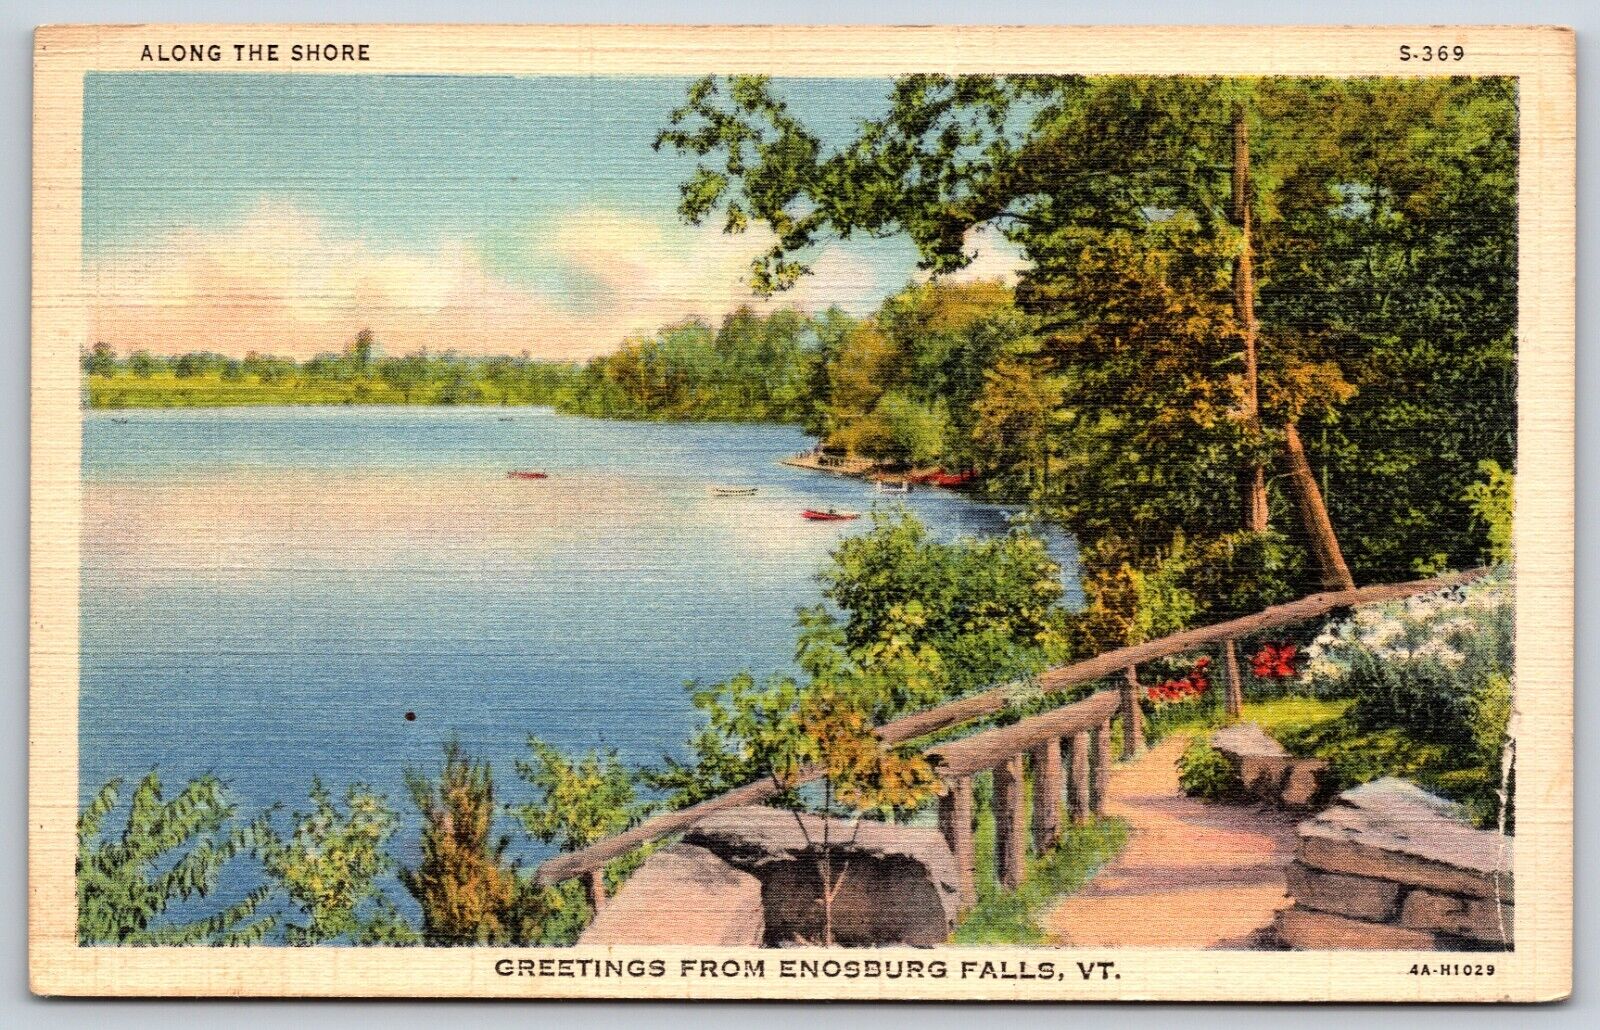 Postcard Greetings From Enosburg Falls, Along The Shore, Vermont Posted 1941